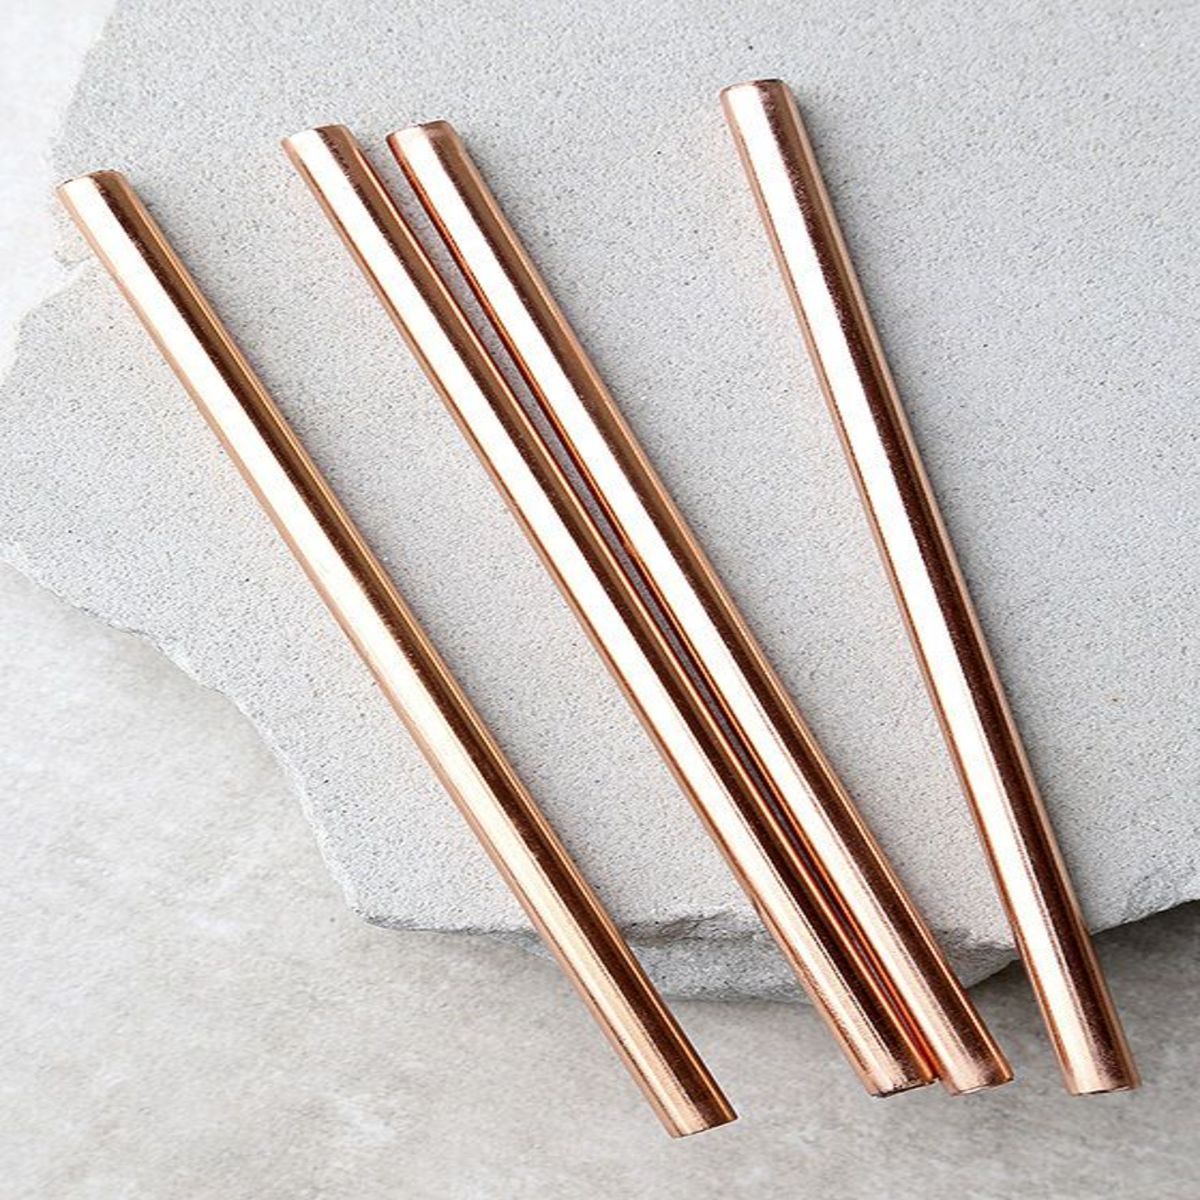 MyOnearth Copper Straw With Cleaner